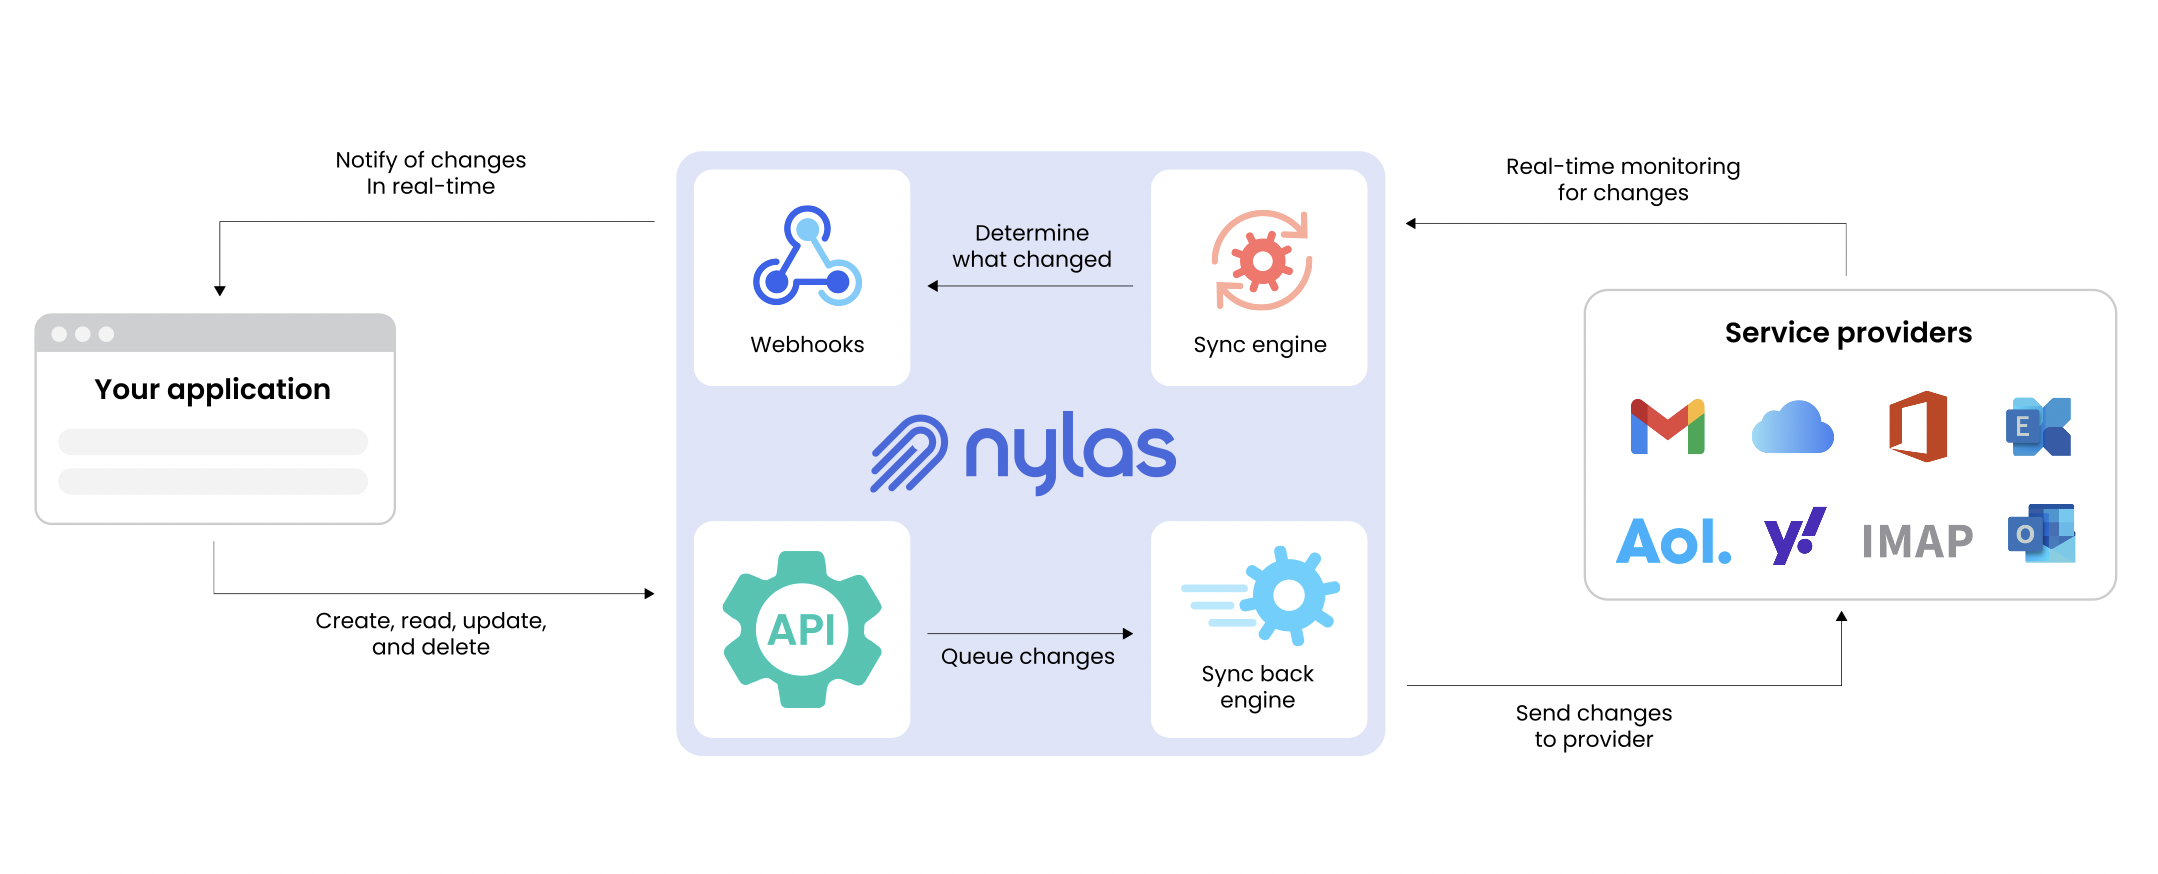 An architecture diagram showing how Nylas interacts with your application and your end users' service providers.